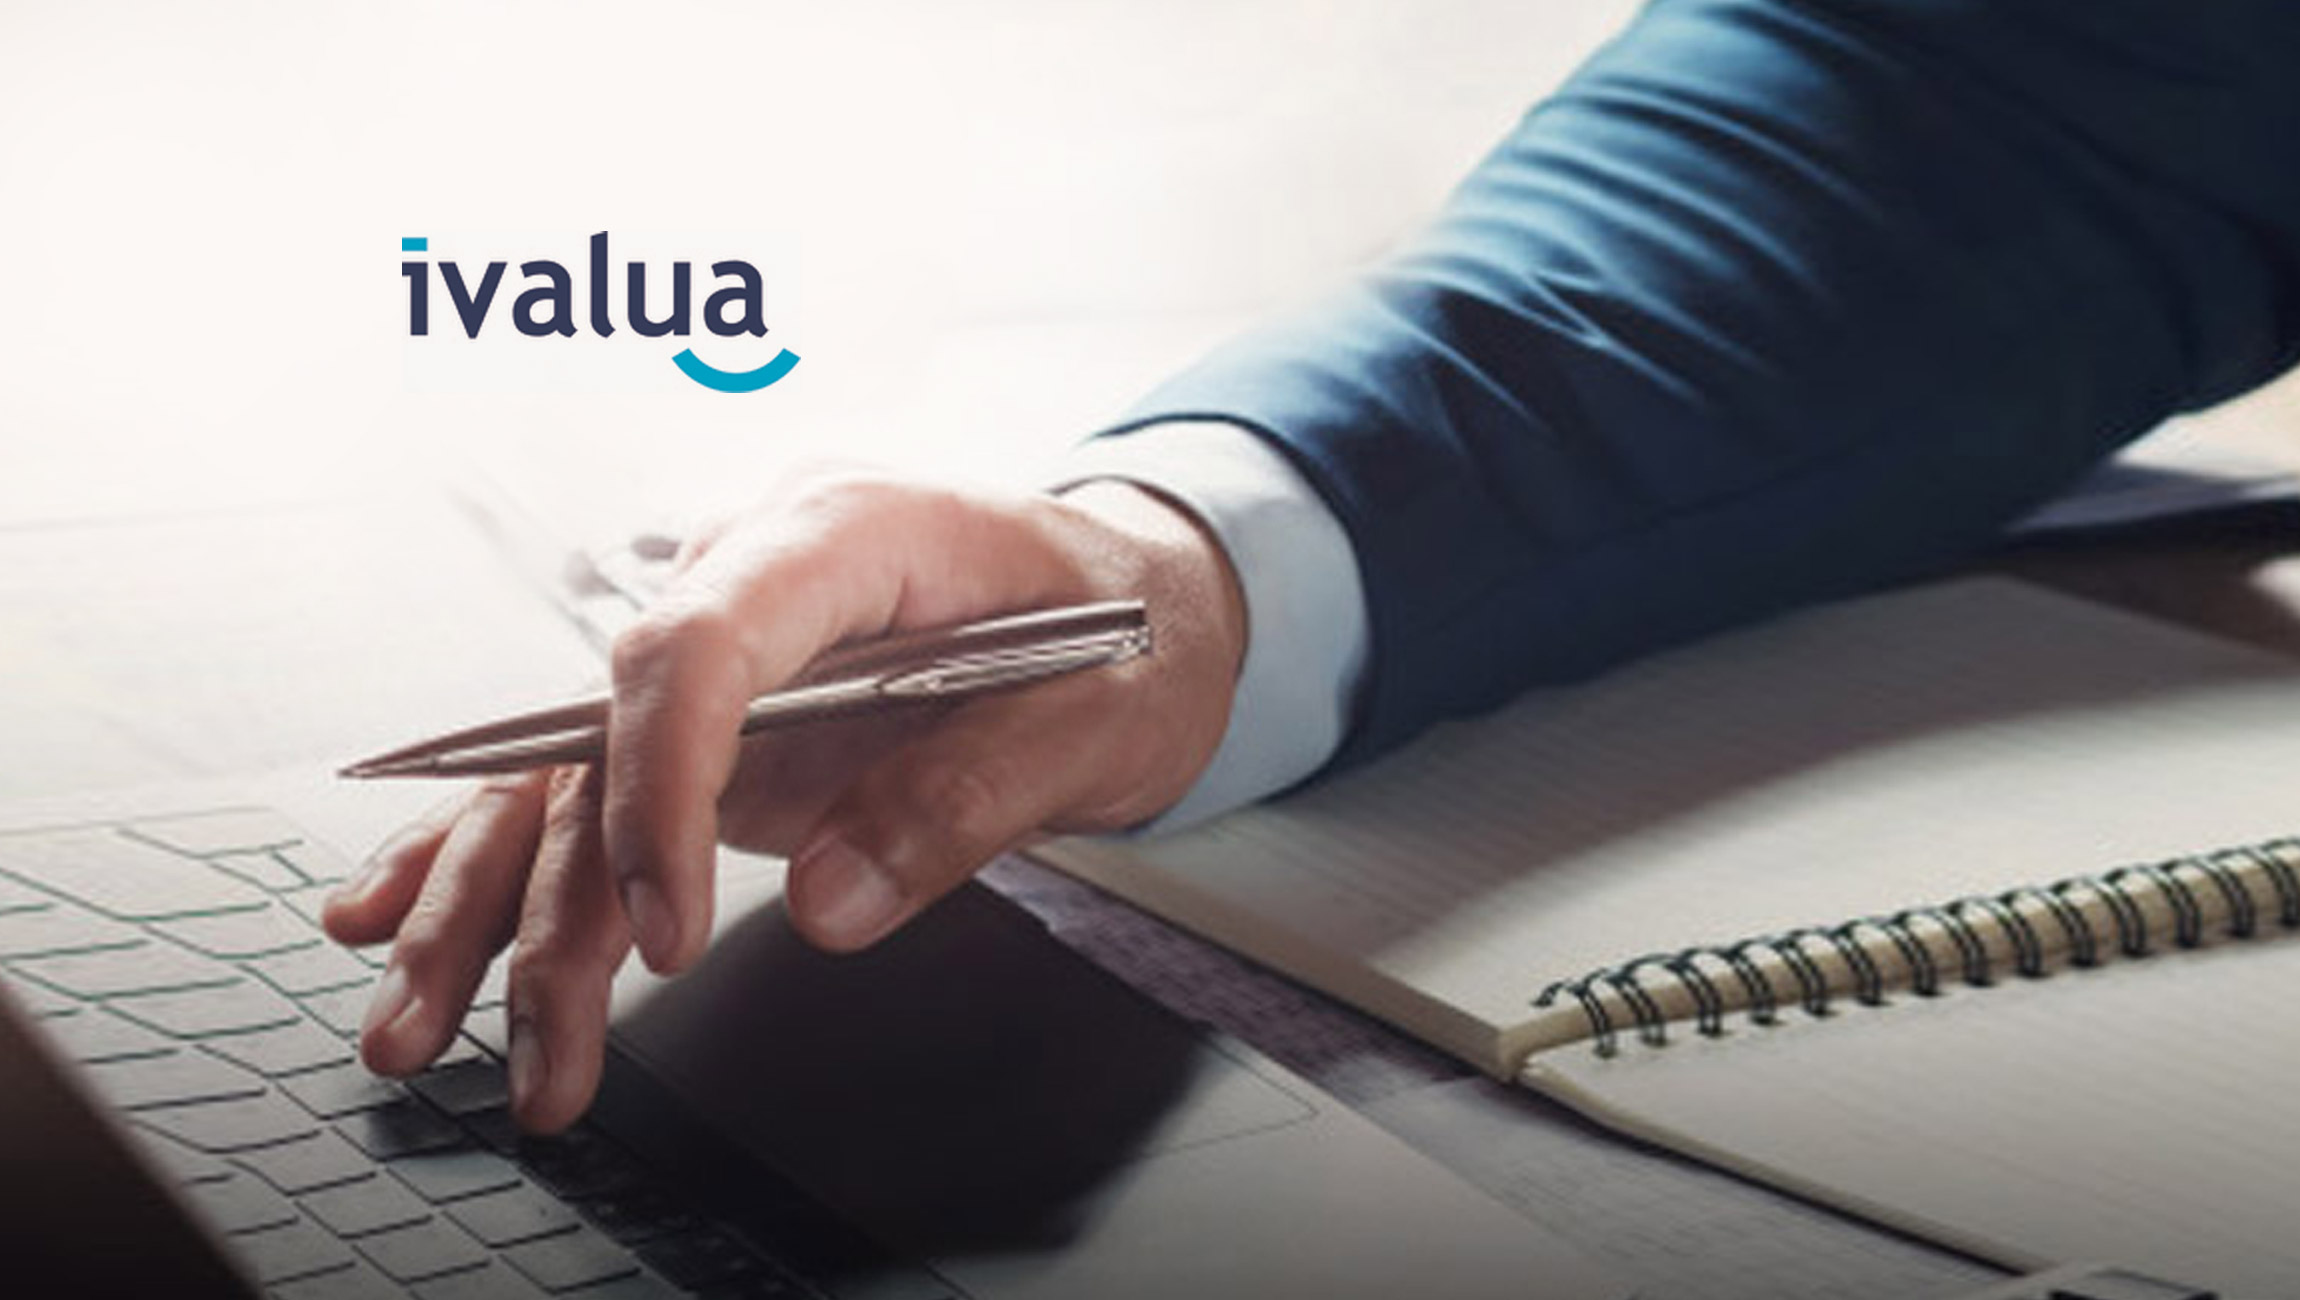 Ivalua named as a 2022 Technology Leader in Quadrant Knowledge Solutions' SPARK Matrix for Source-to-Pay (S2P) suites, 2022